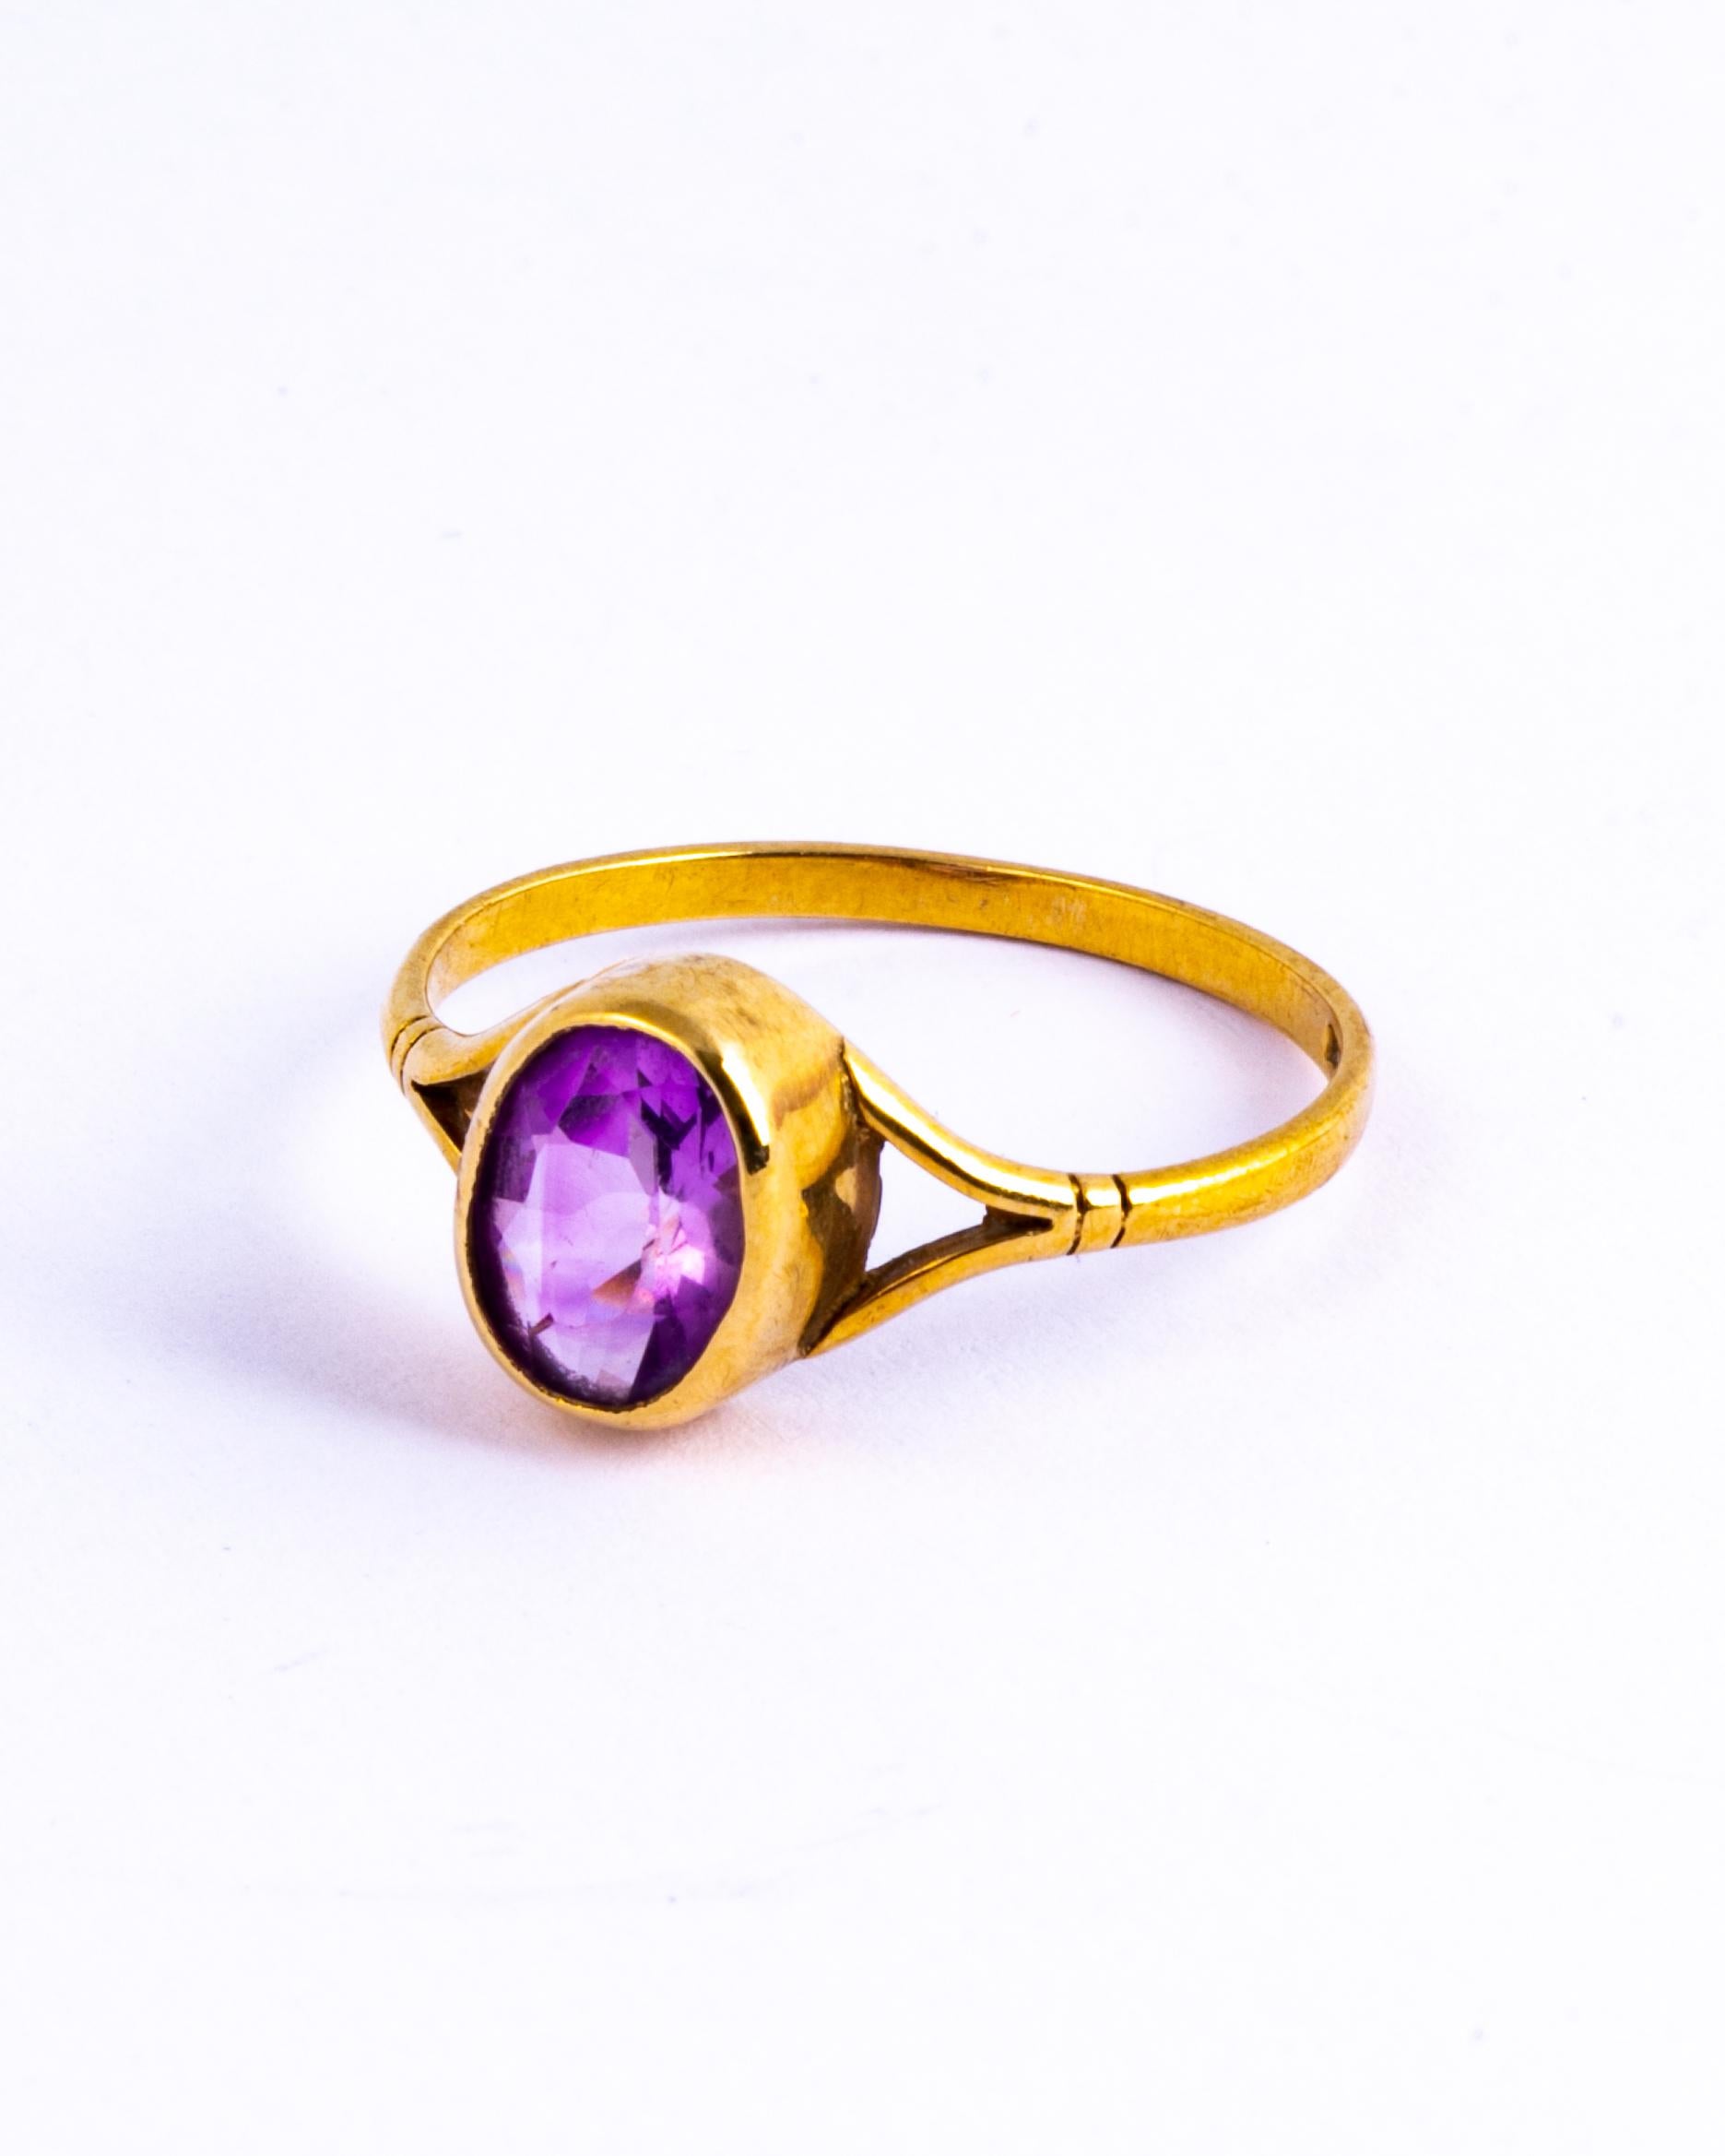 This ring holds a gorgeous pale purple amethyst stone in a simple setting with split shoulders. 

Ring Size: P or 7 3/4 
Stone Dimensions: 8x6mm

Weight: 1.69g